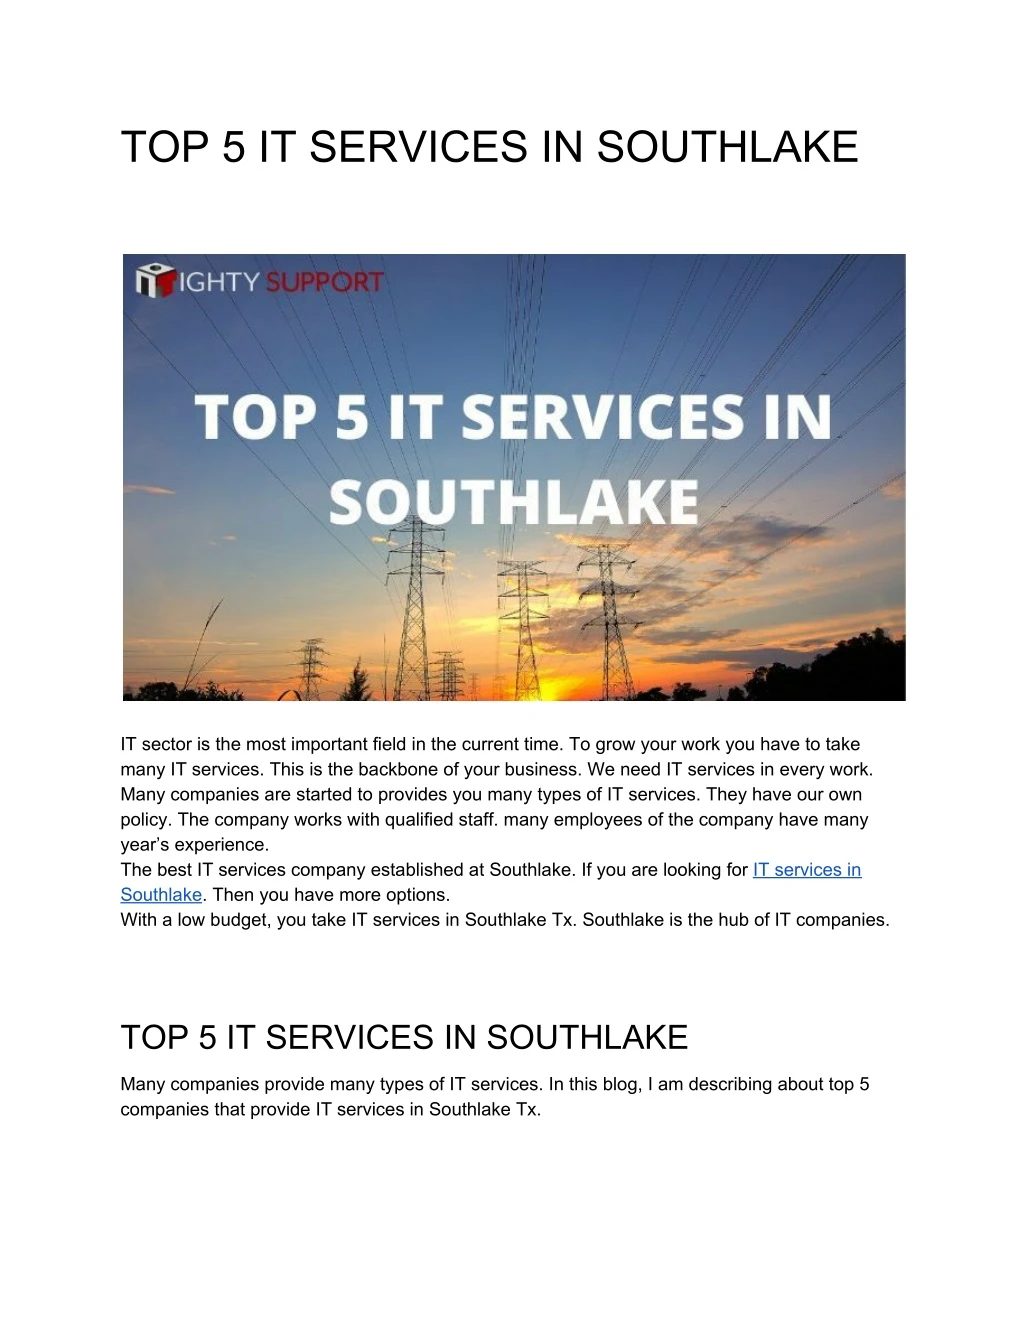 top 5 it services in southlake